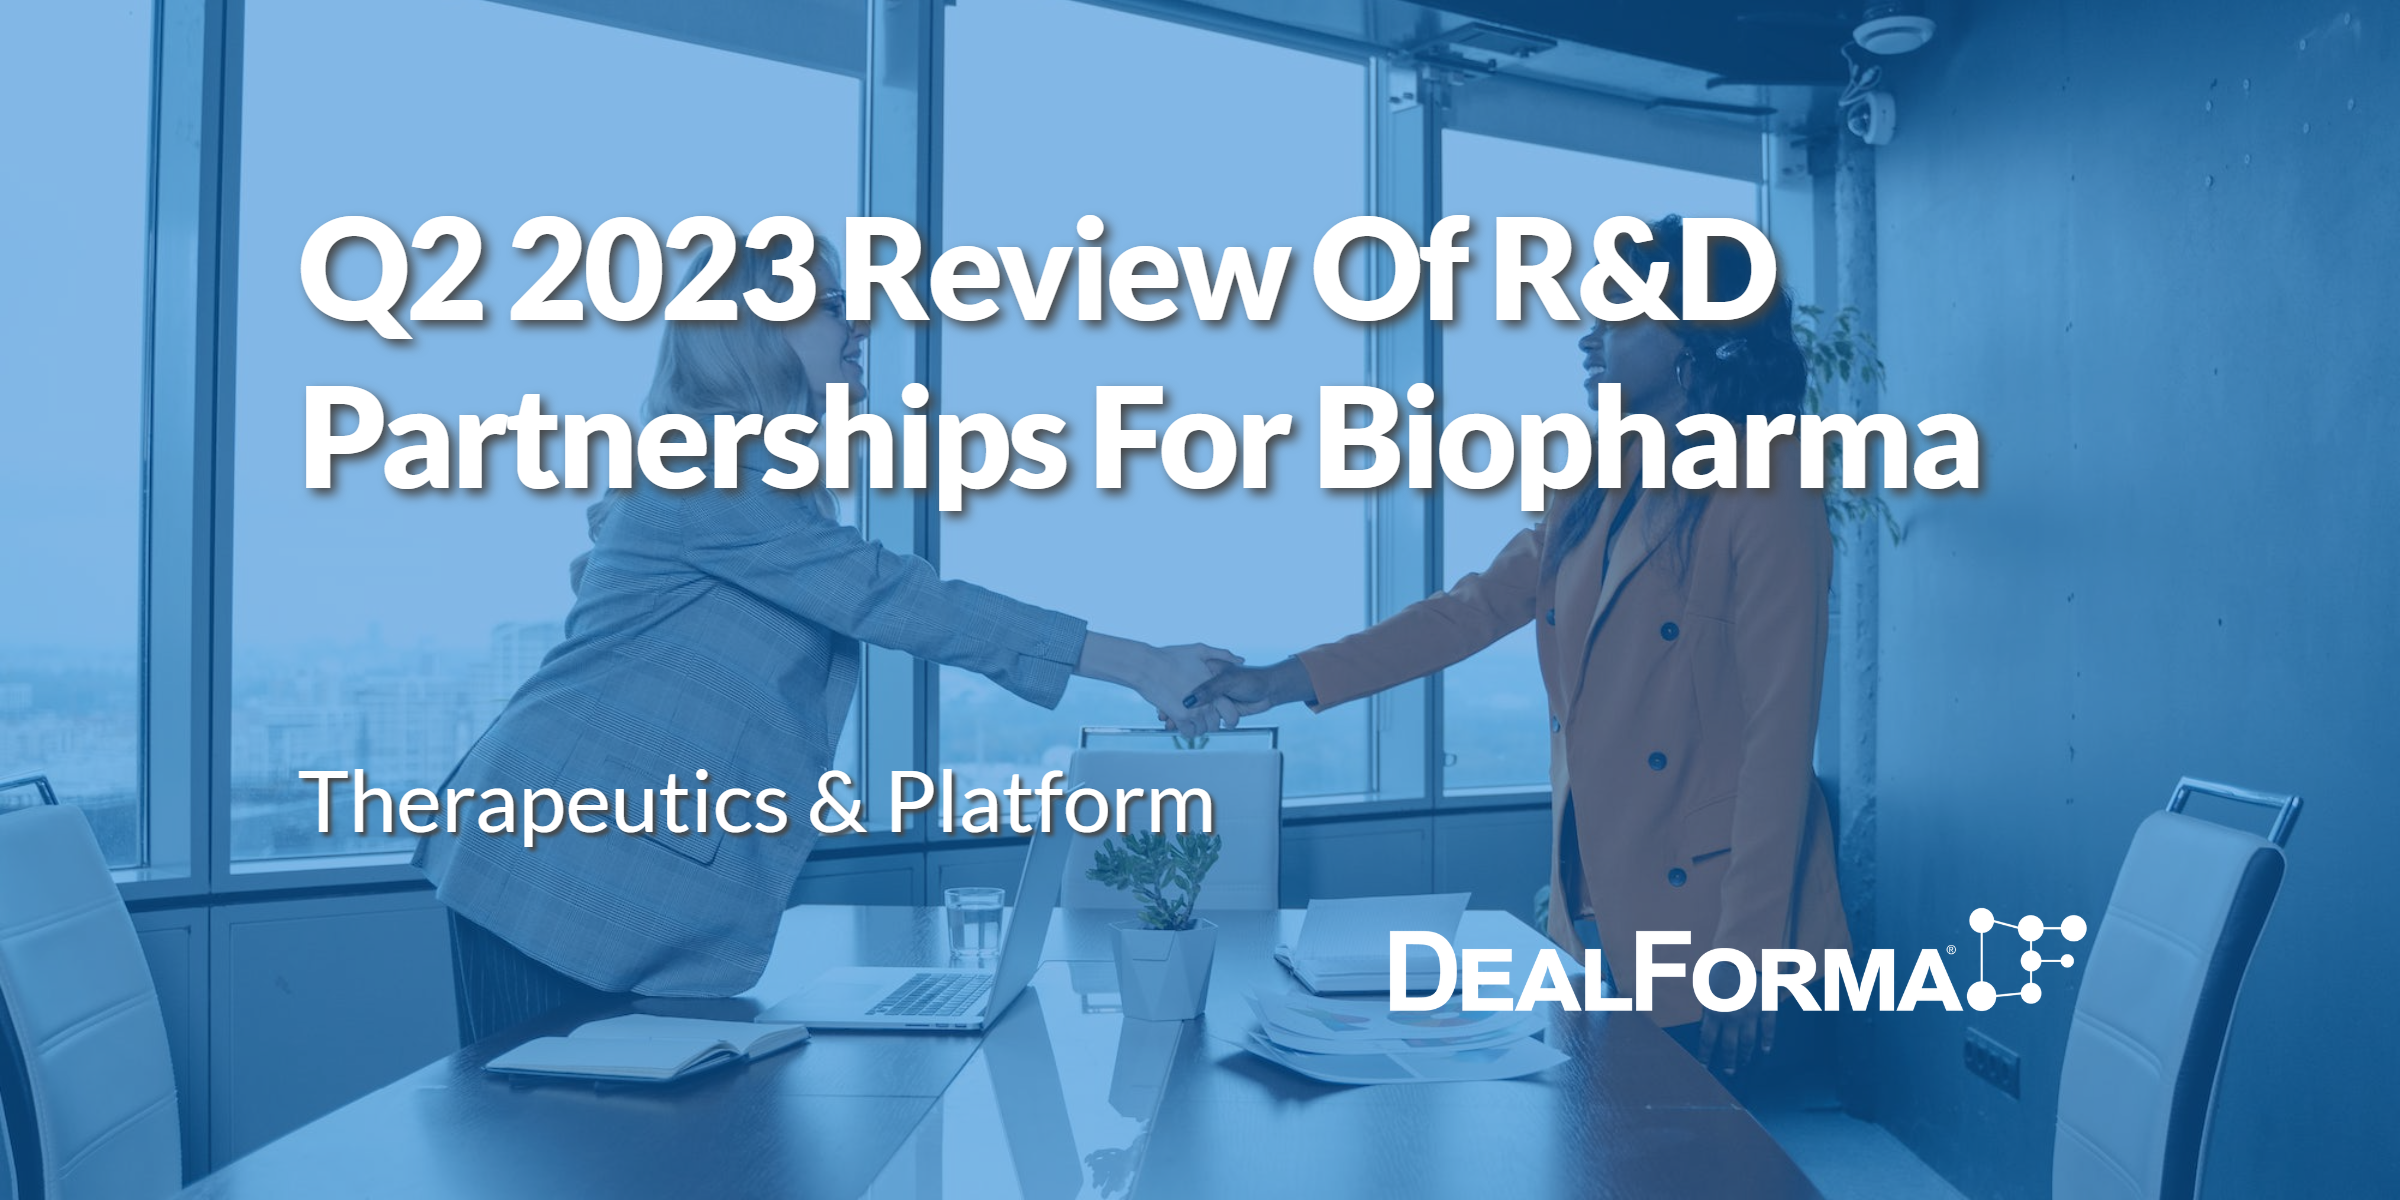 Q2 2023 Review Of R&D Partnerships For Biopharma Therapeutics & Platforms